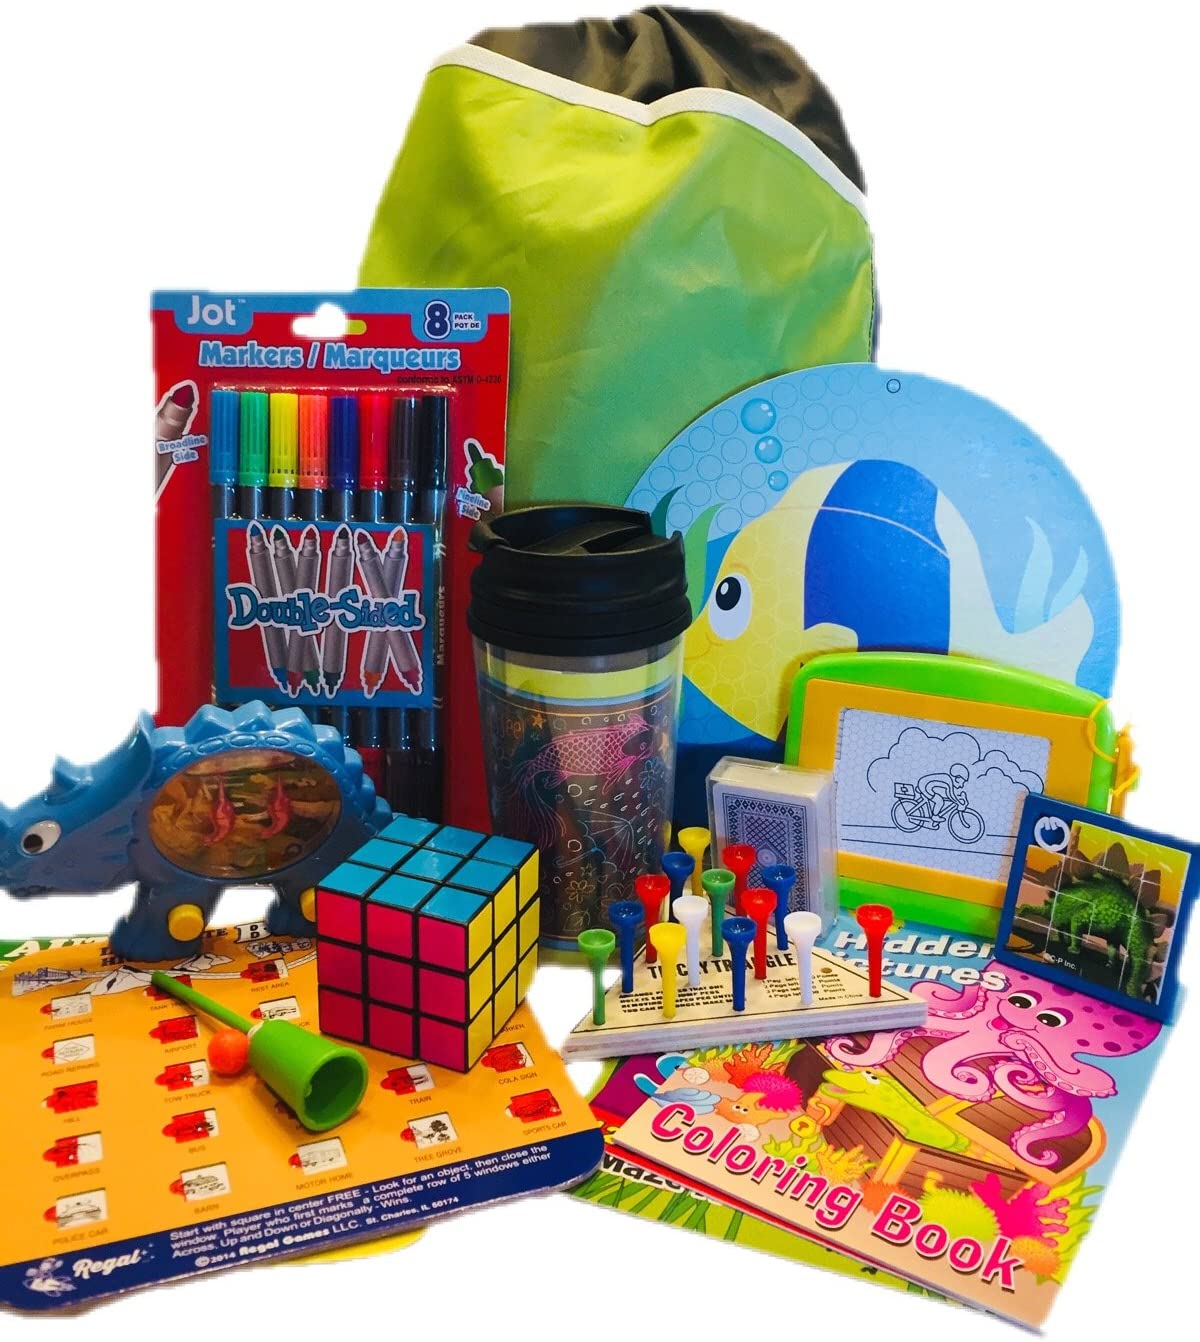 Travel Activity Bag Kit for Kids - Keep children busy on the airplane or in the car